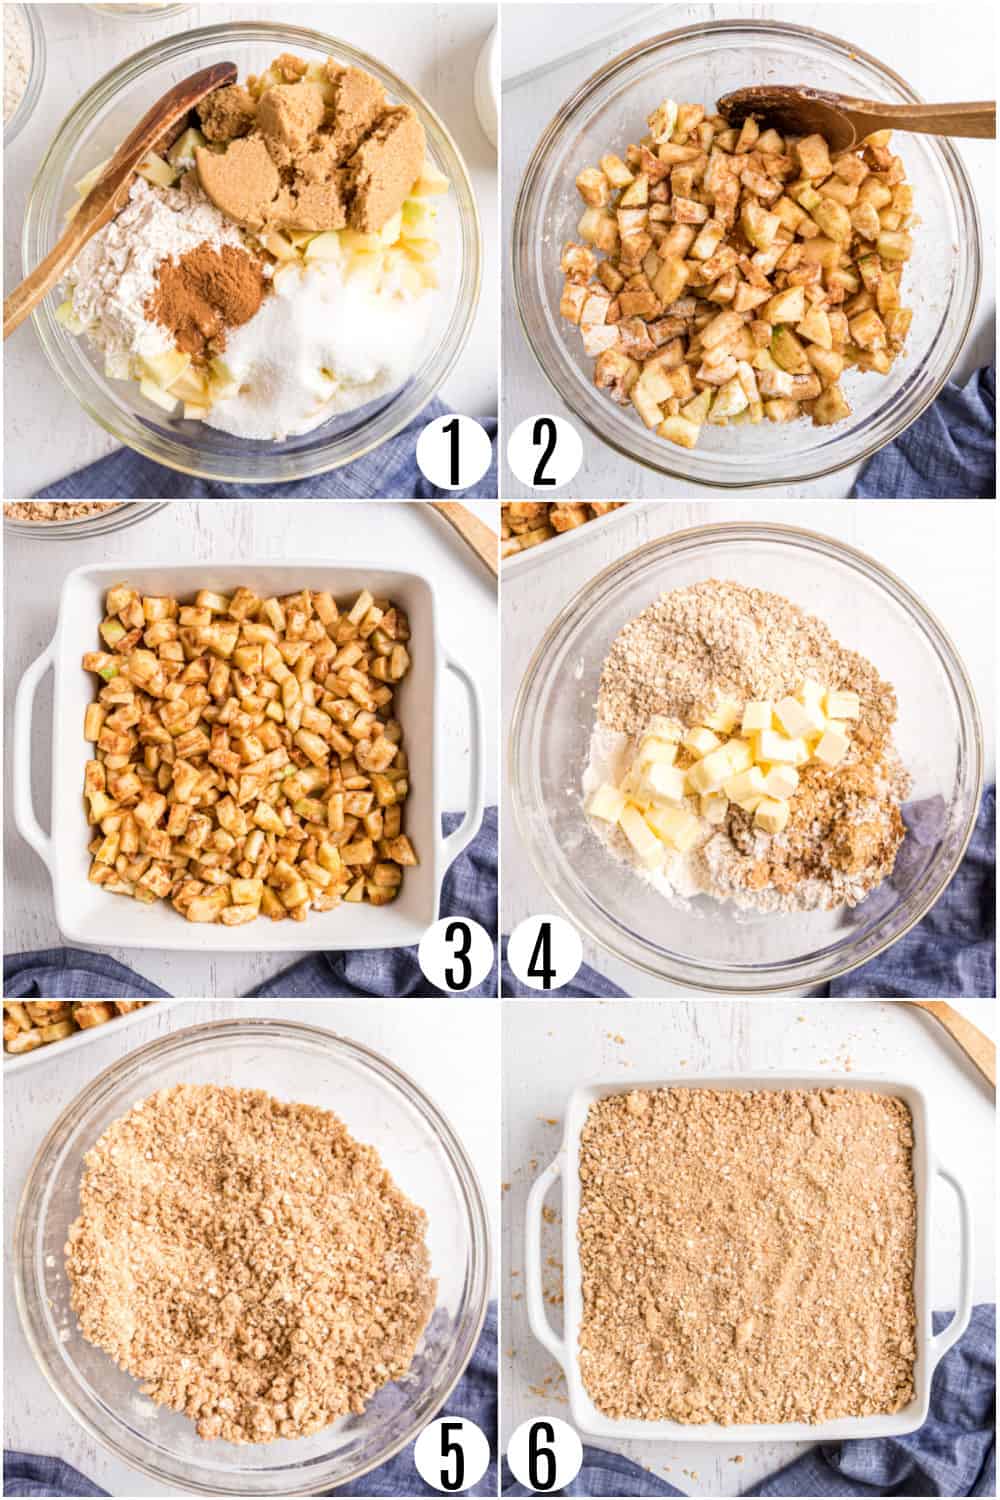 Step by step photos showing how to make apple crumble.